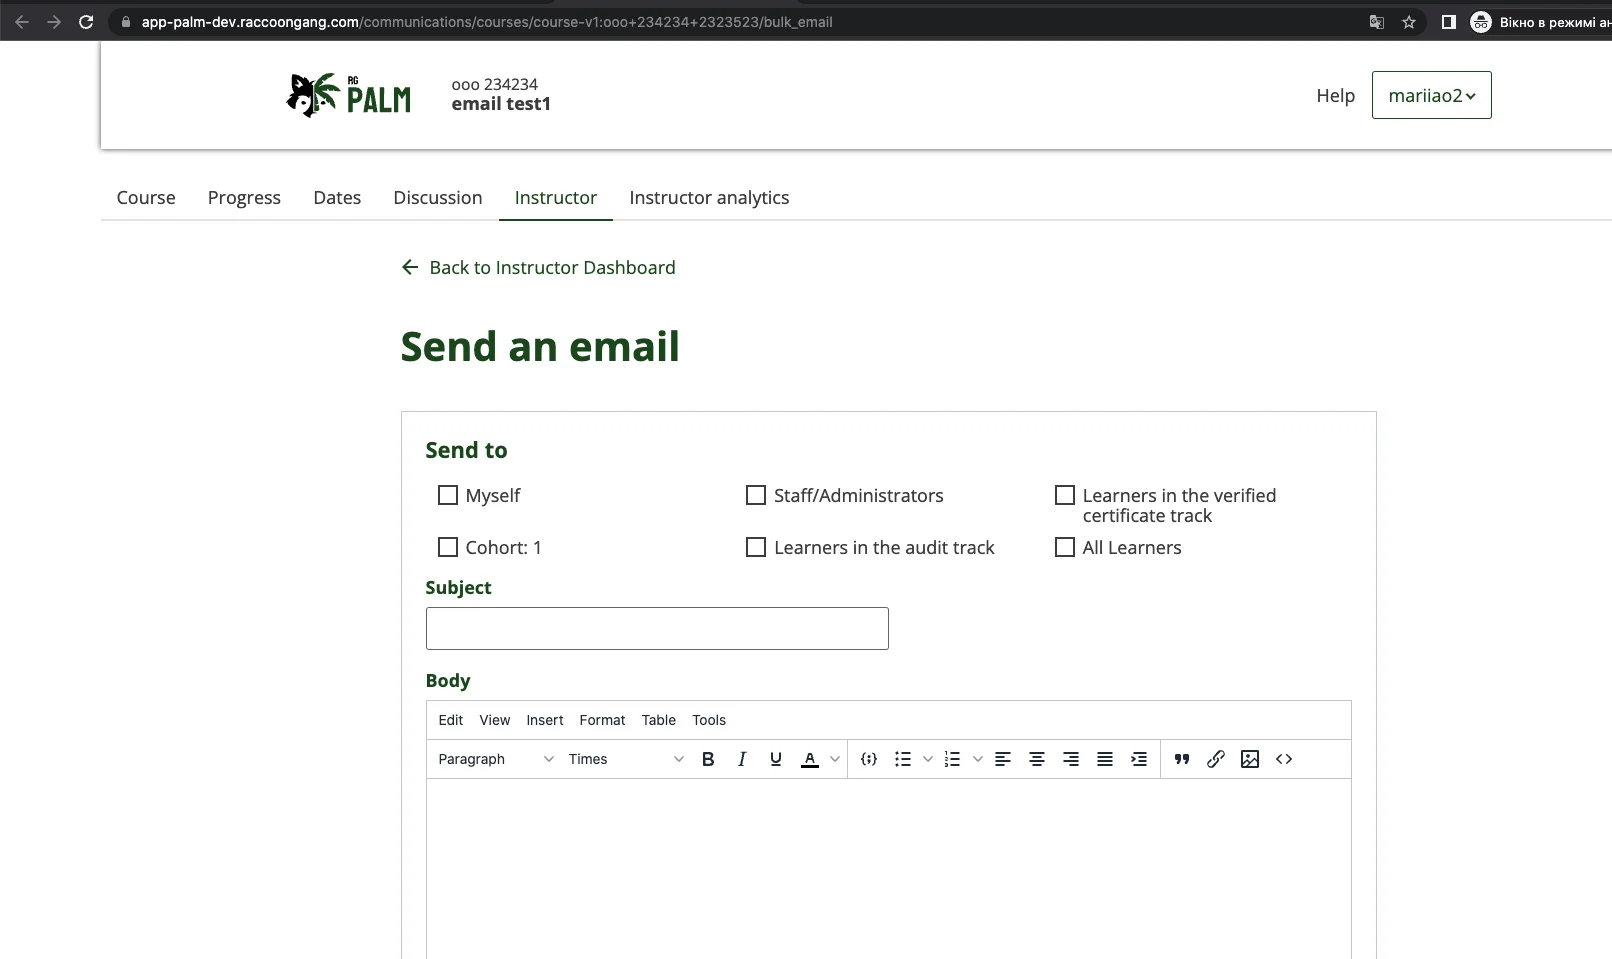 Bulk Email Experience with Communications MFE